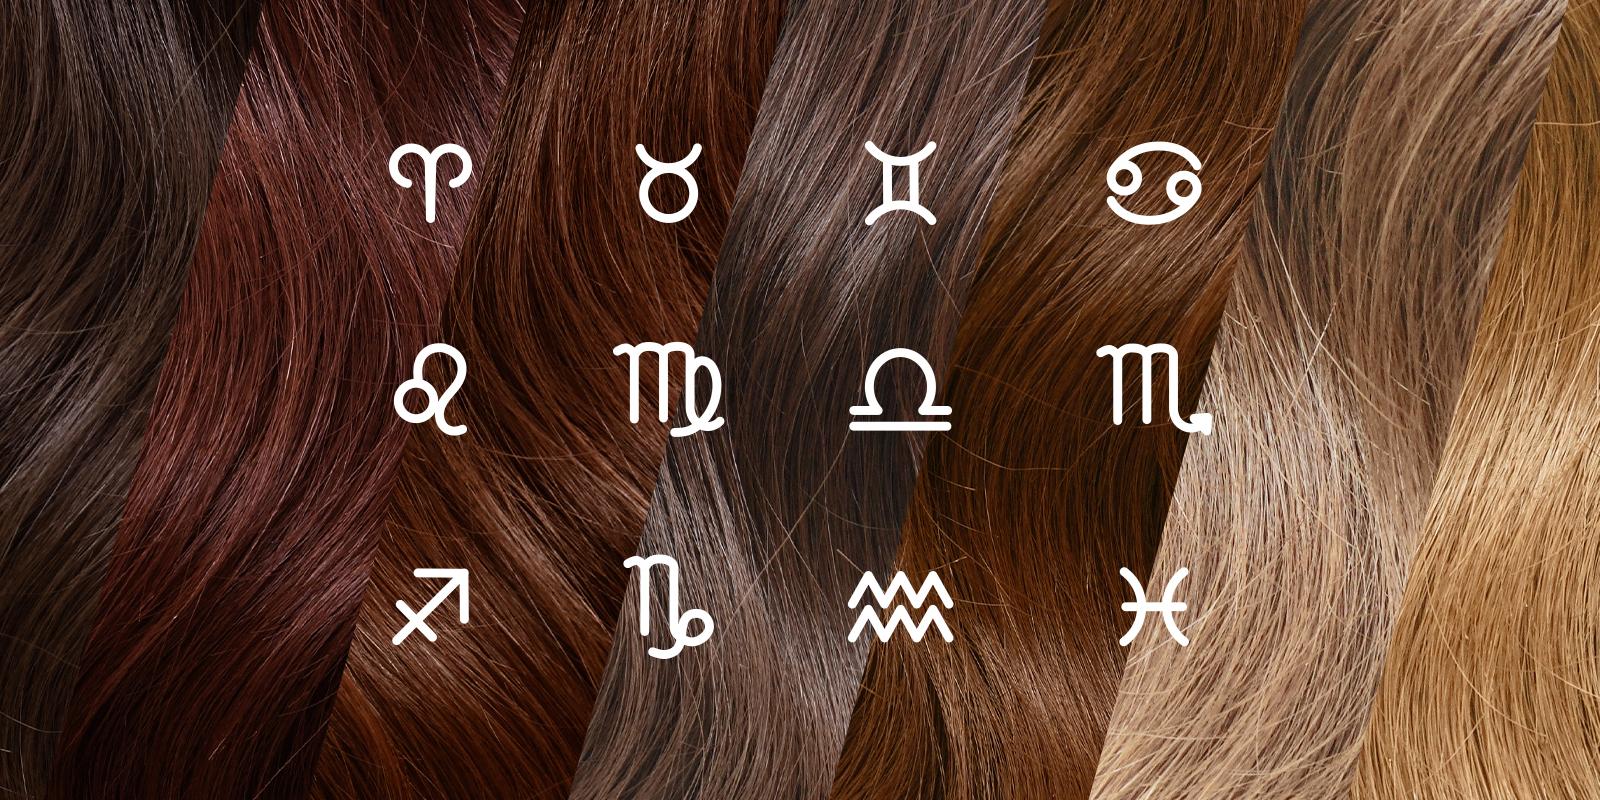 Hairstyle Ideas According To Your Horoscope